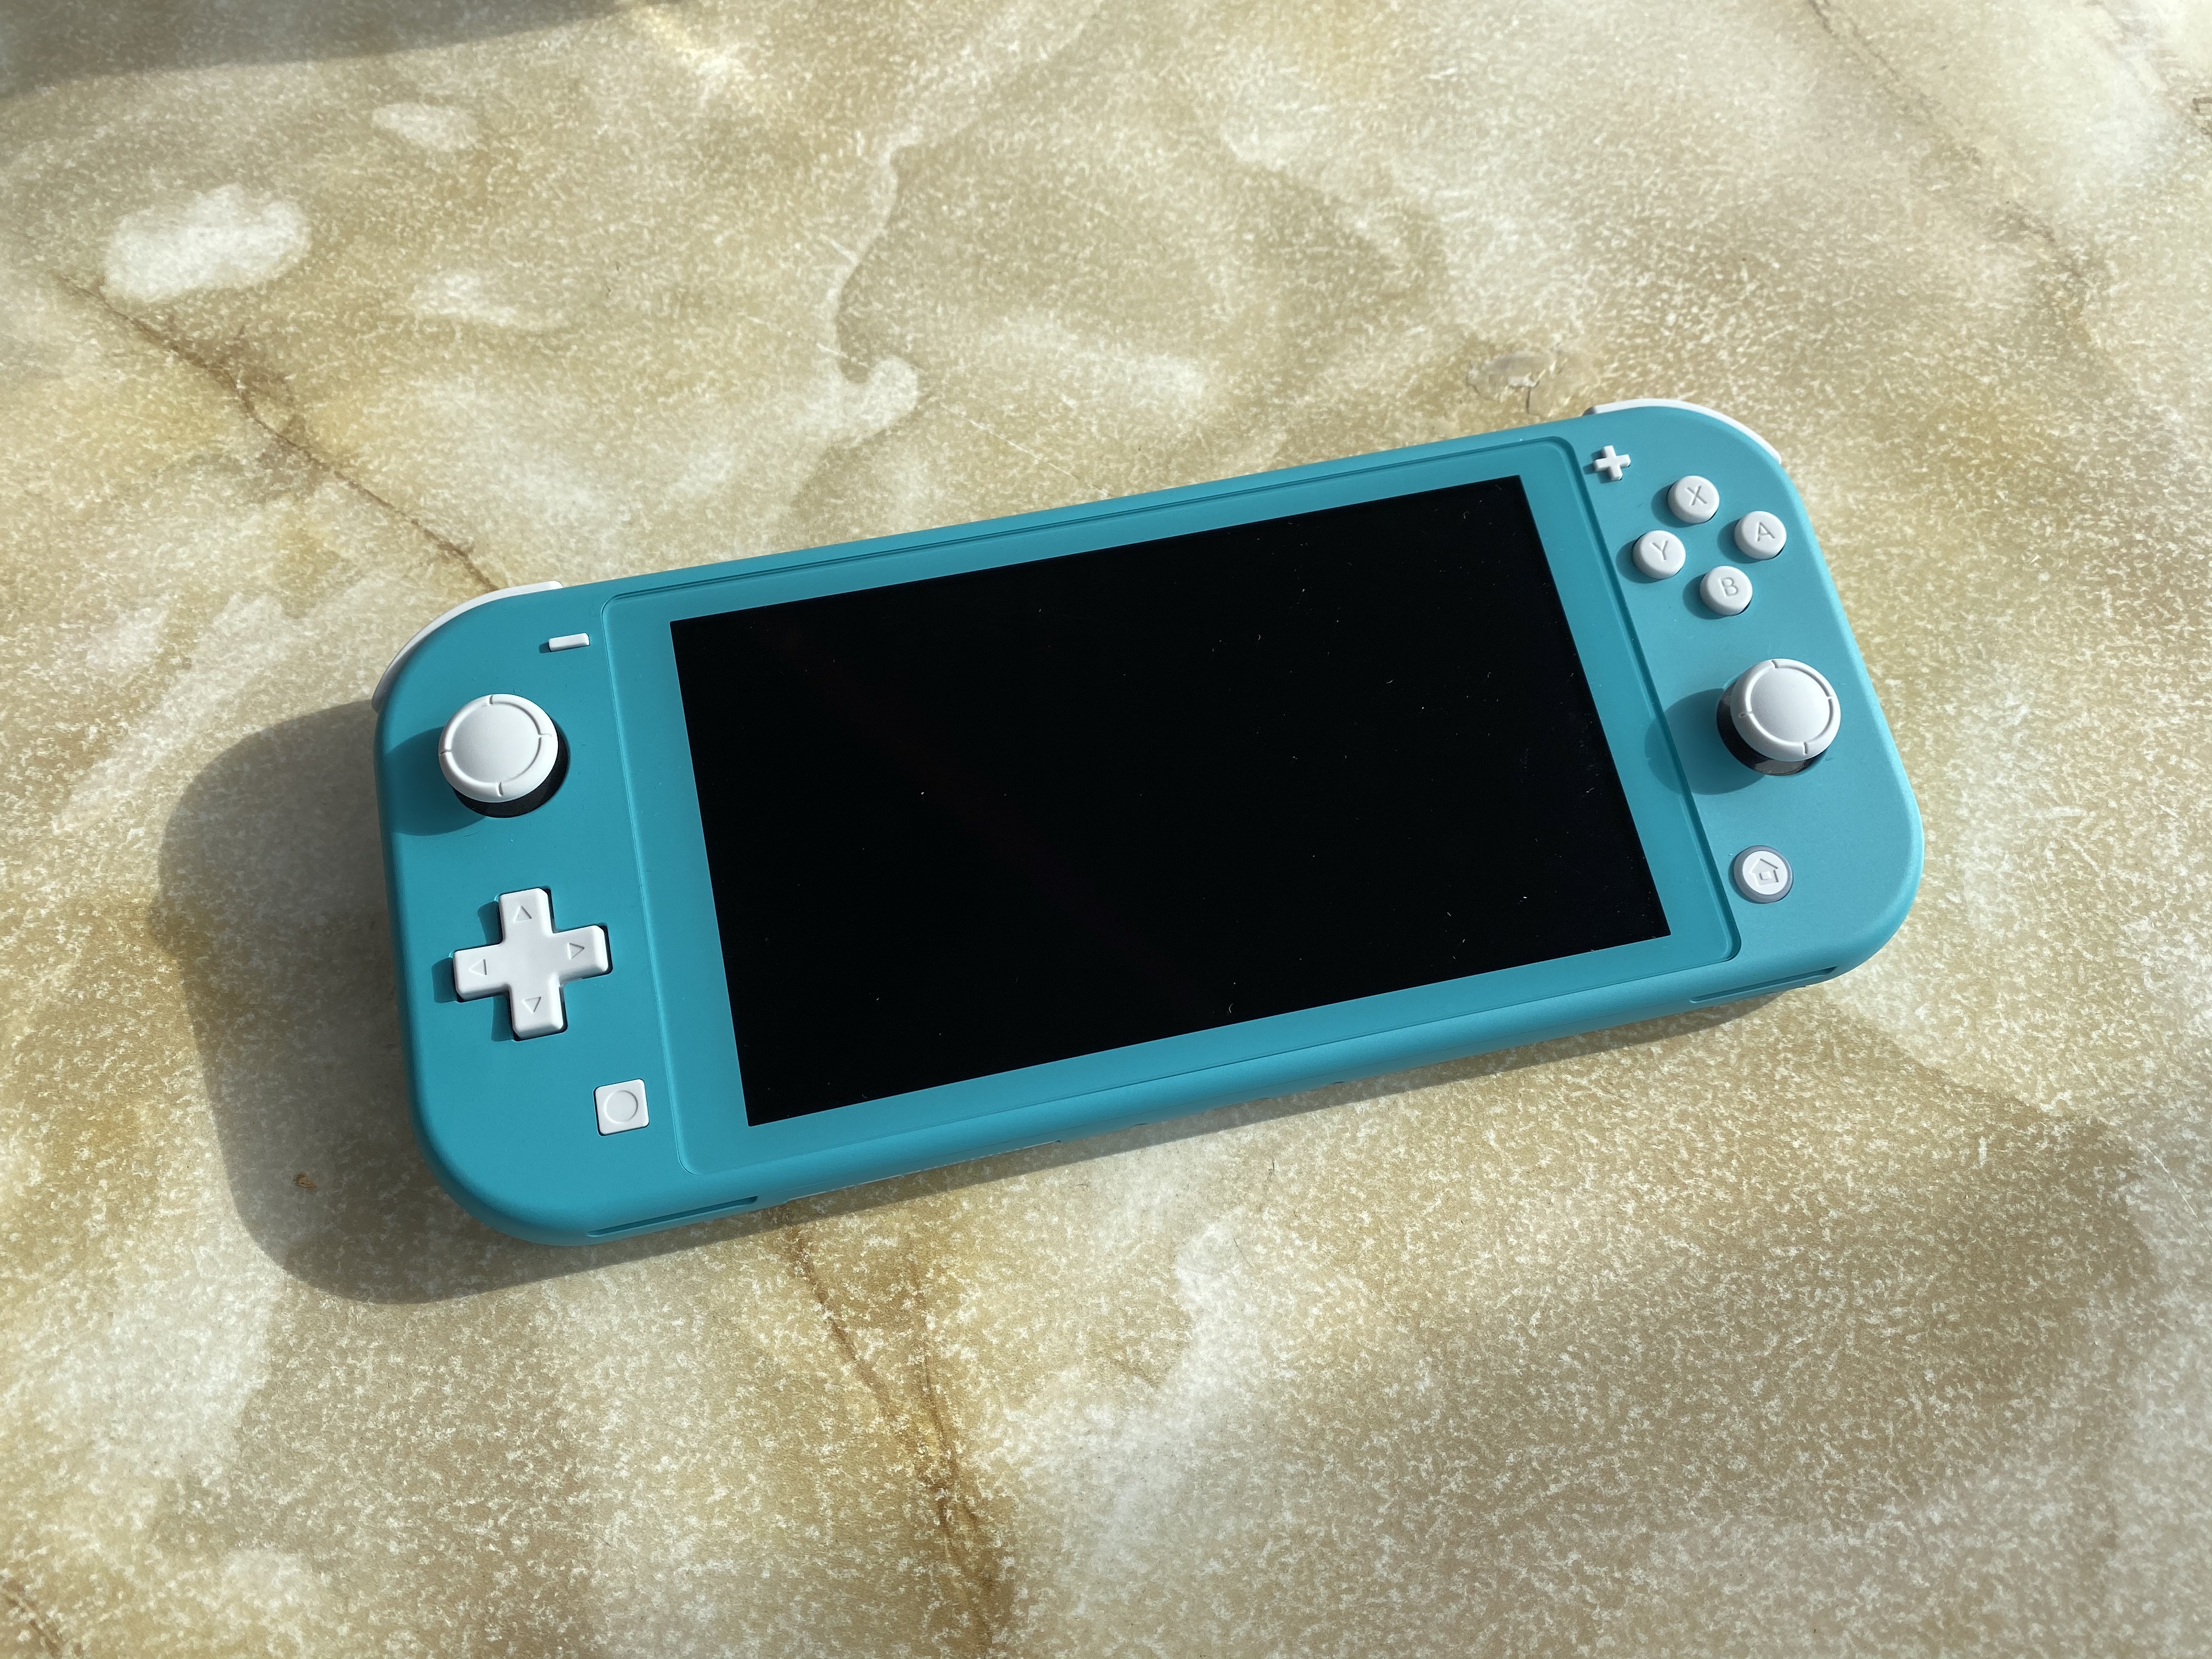 Nintendo Switch Lite review: Where to buy it and why I love it